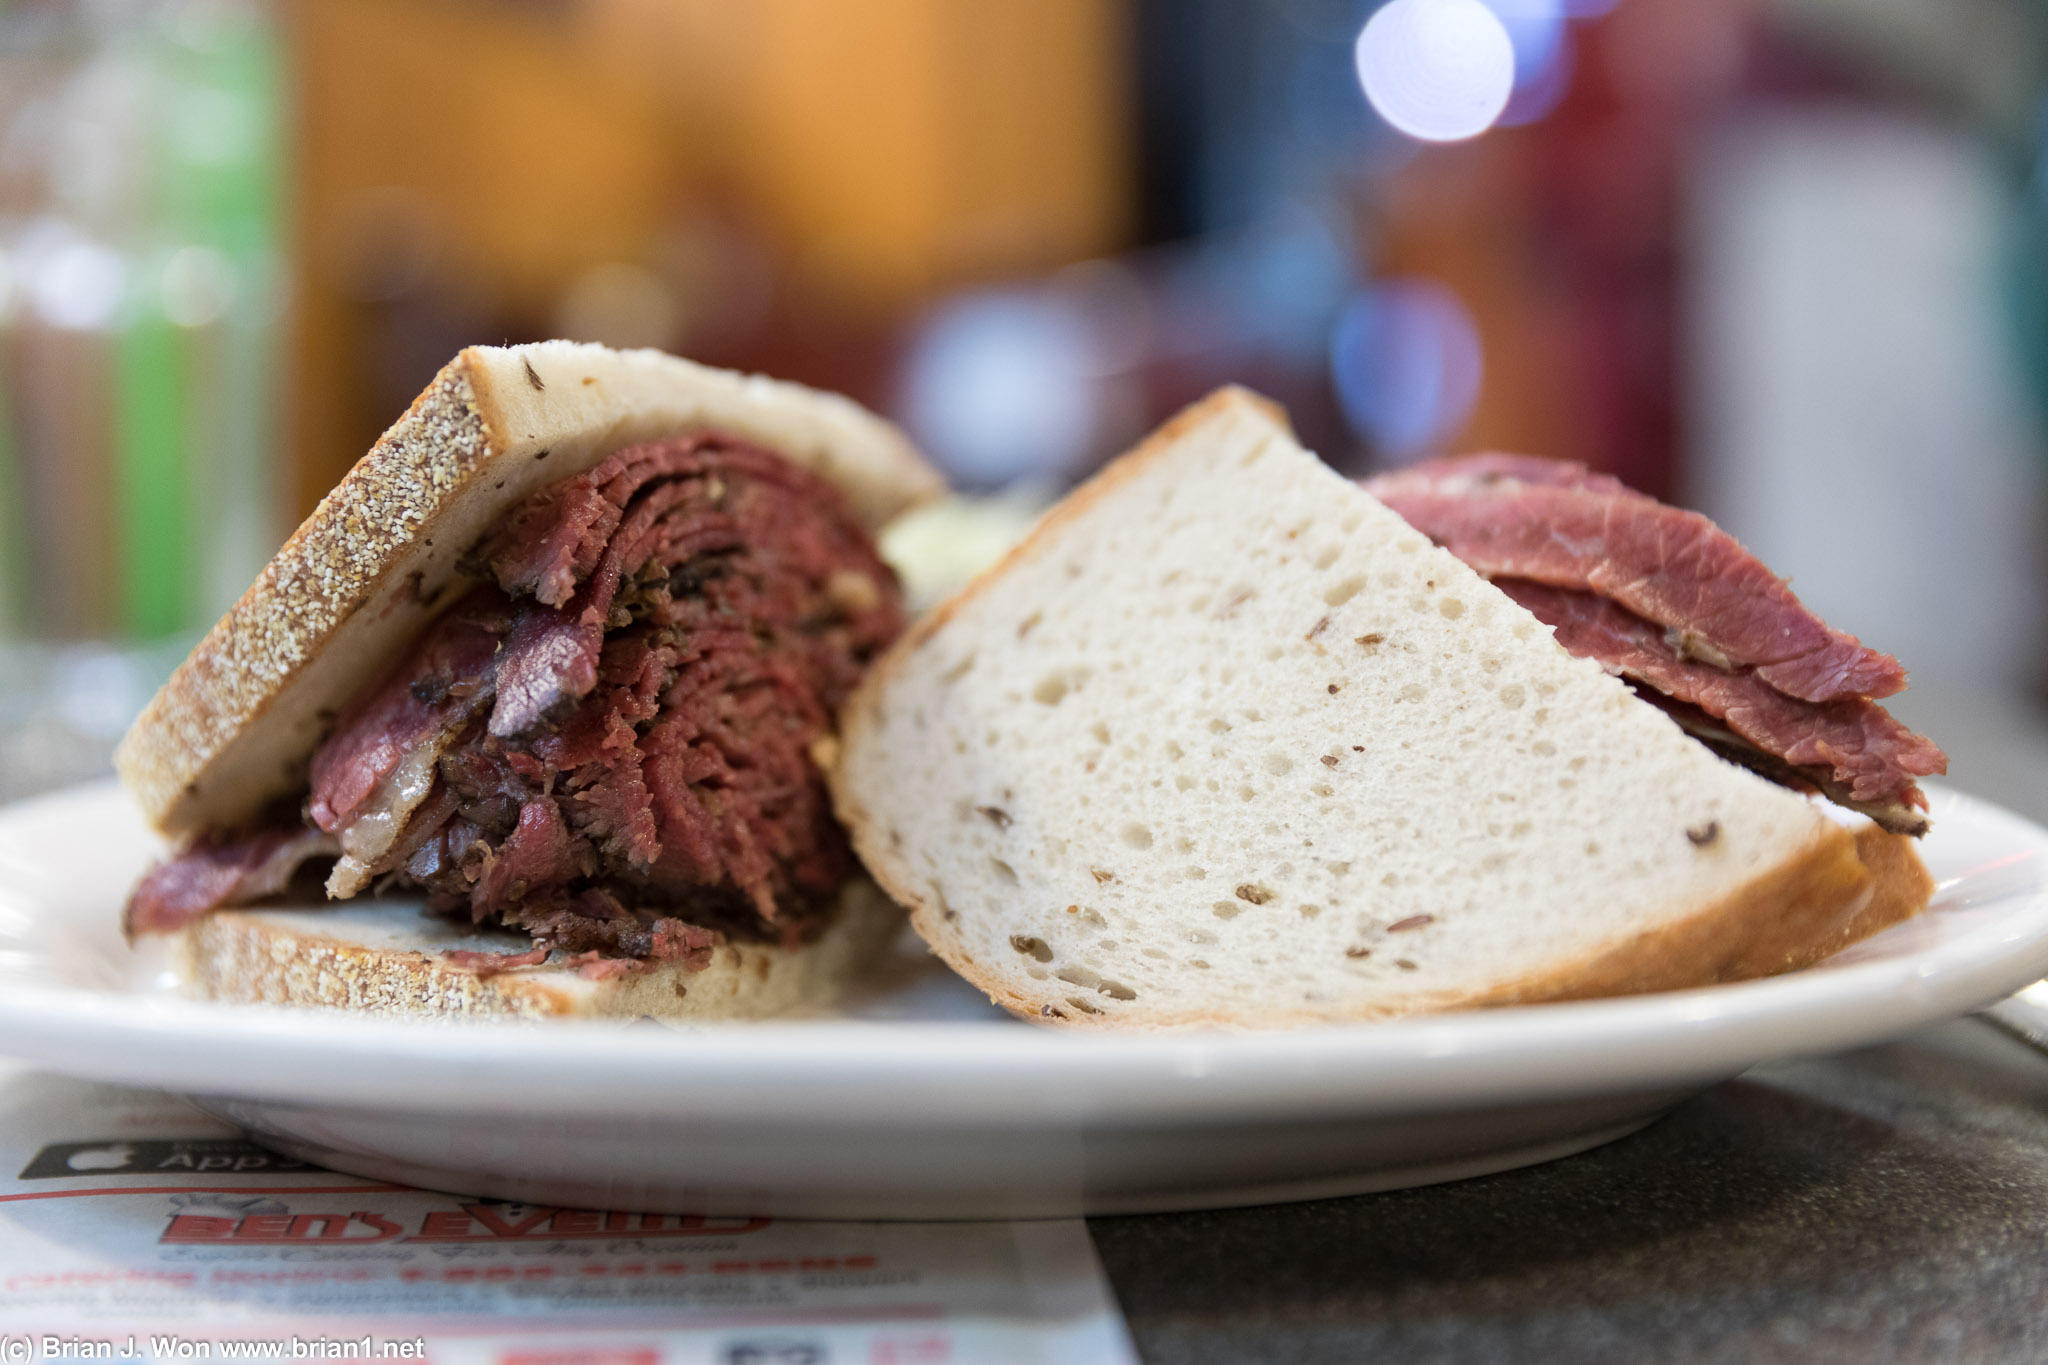 Pastrami was entirely forgettable.